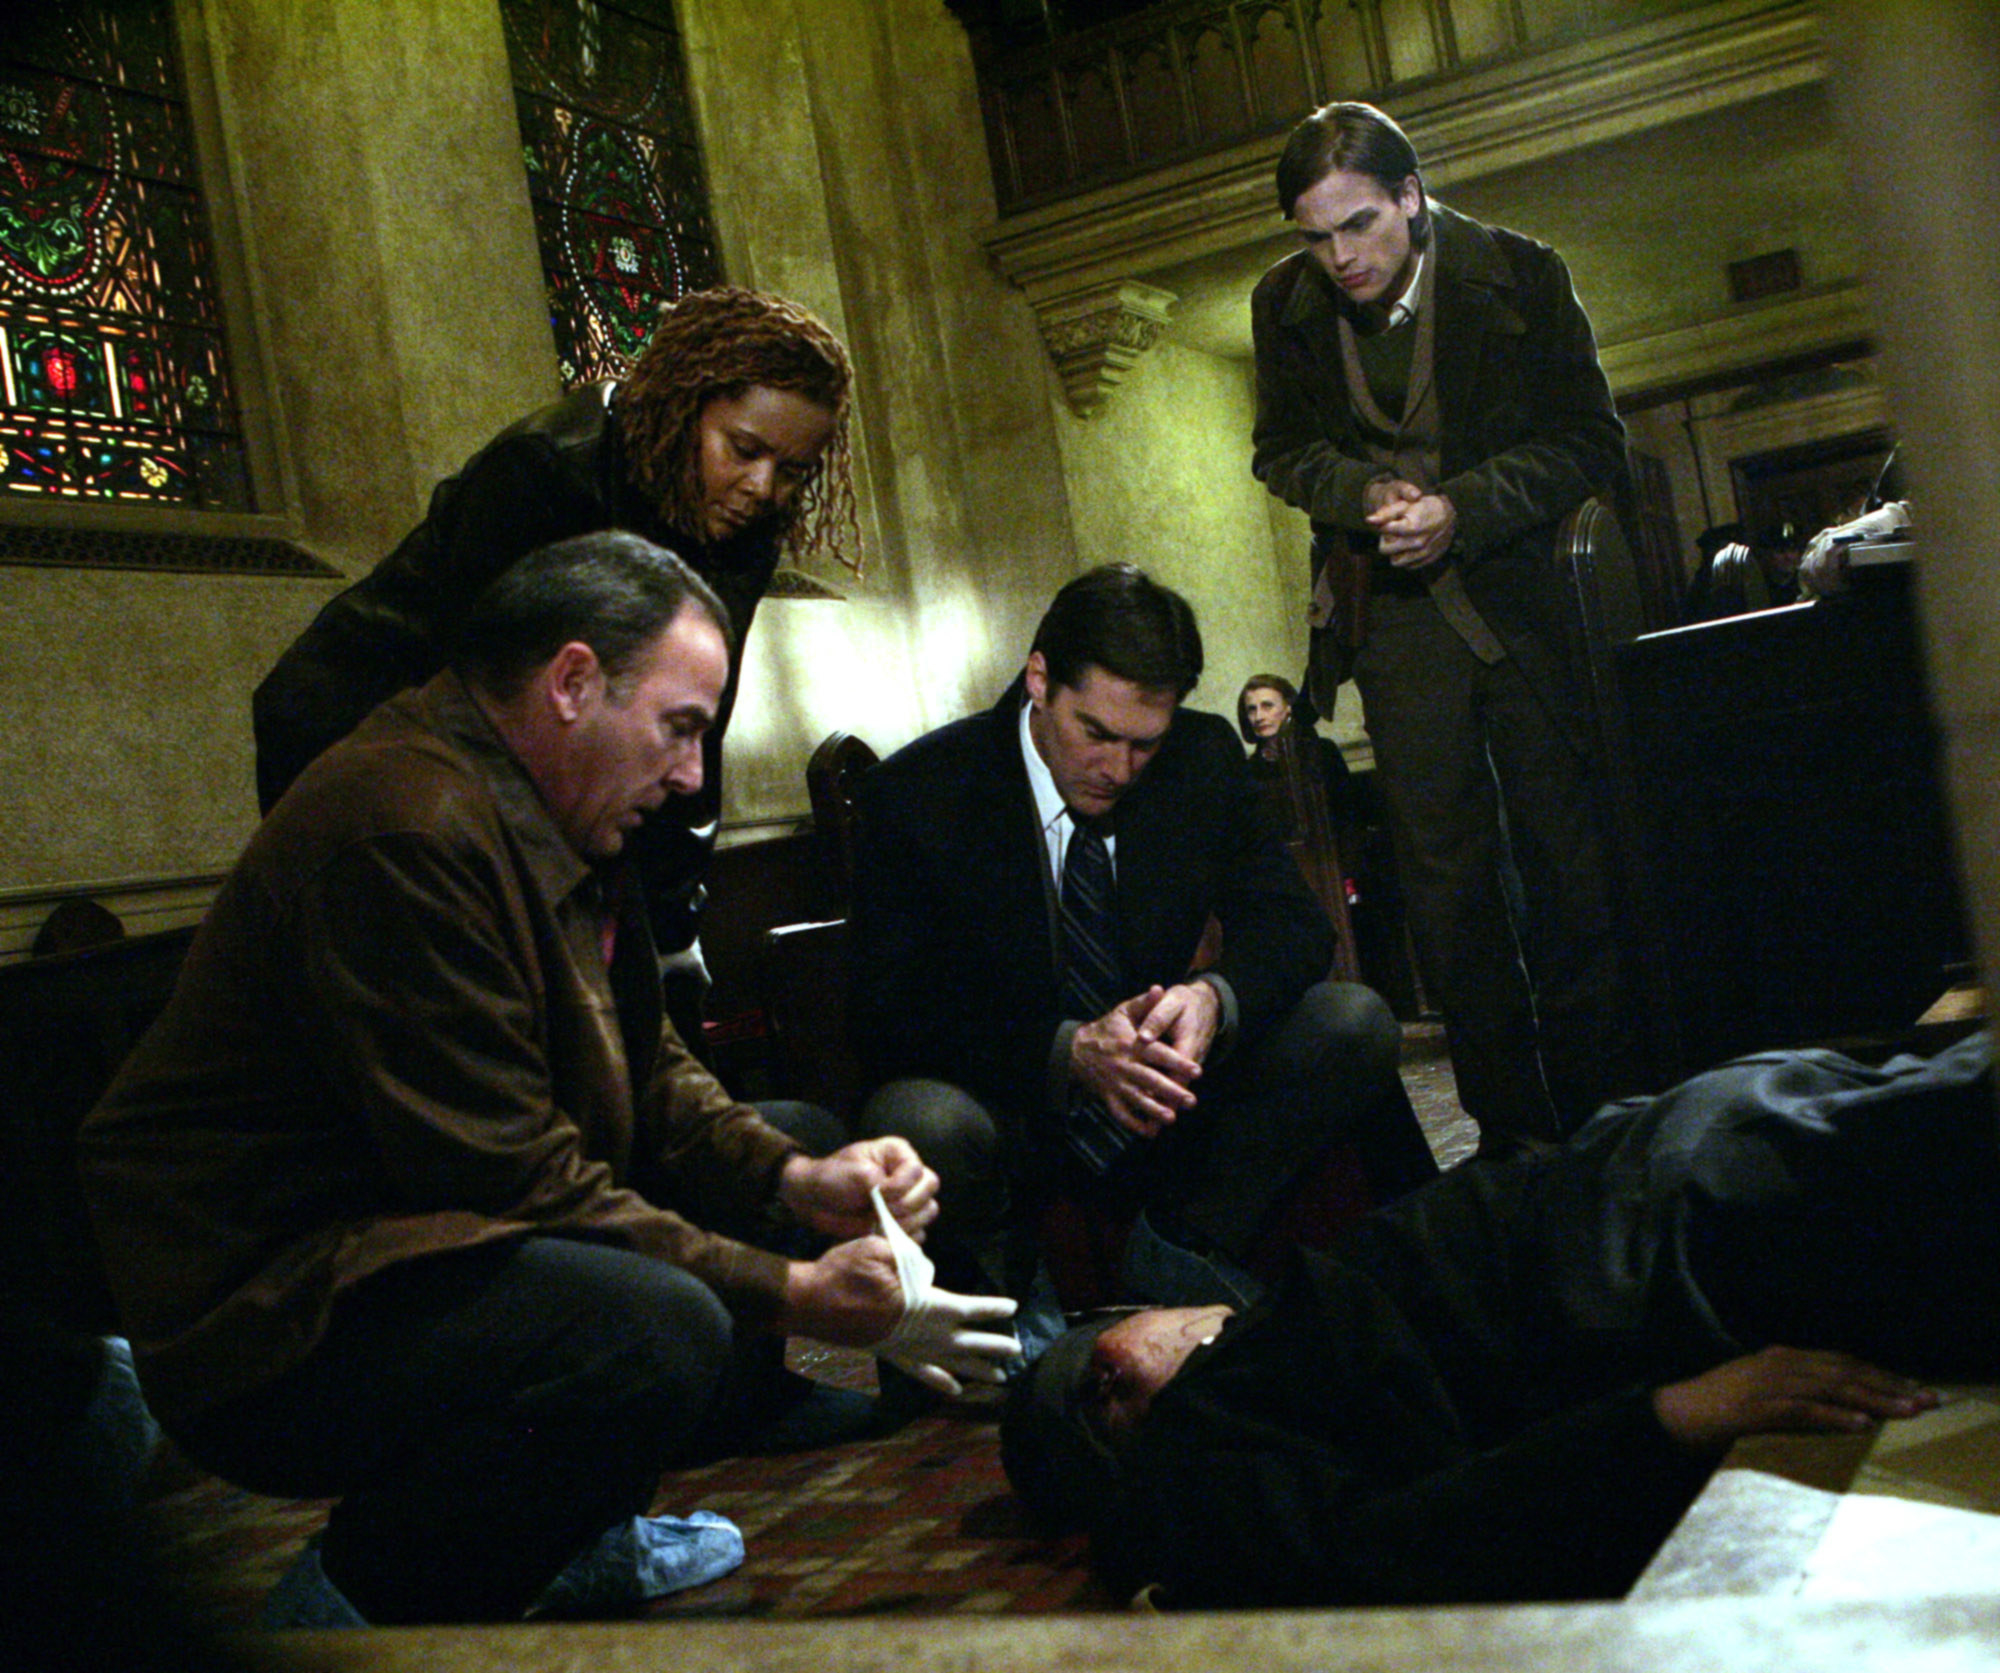 the characters leaning down and looking at a dead victim